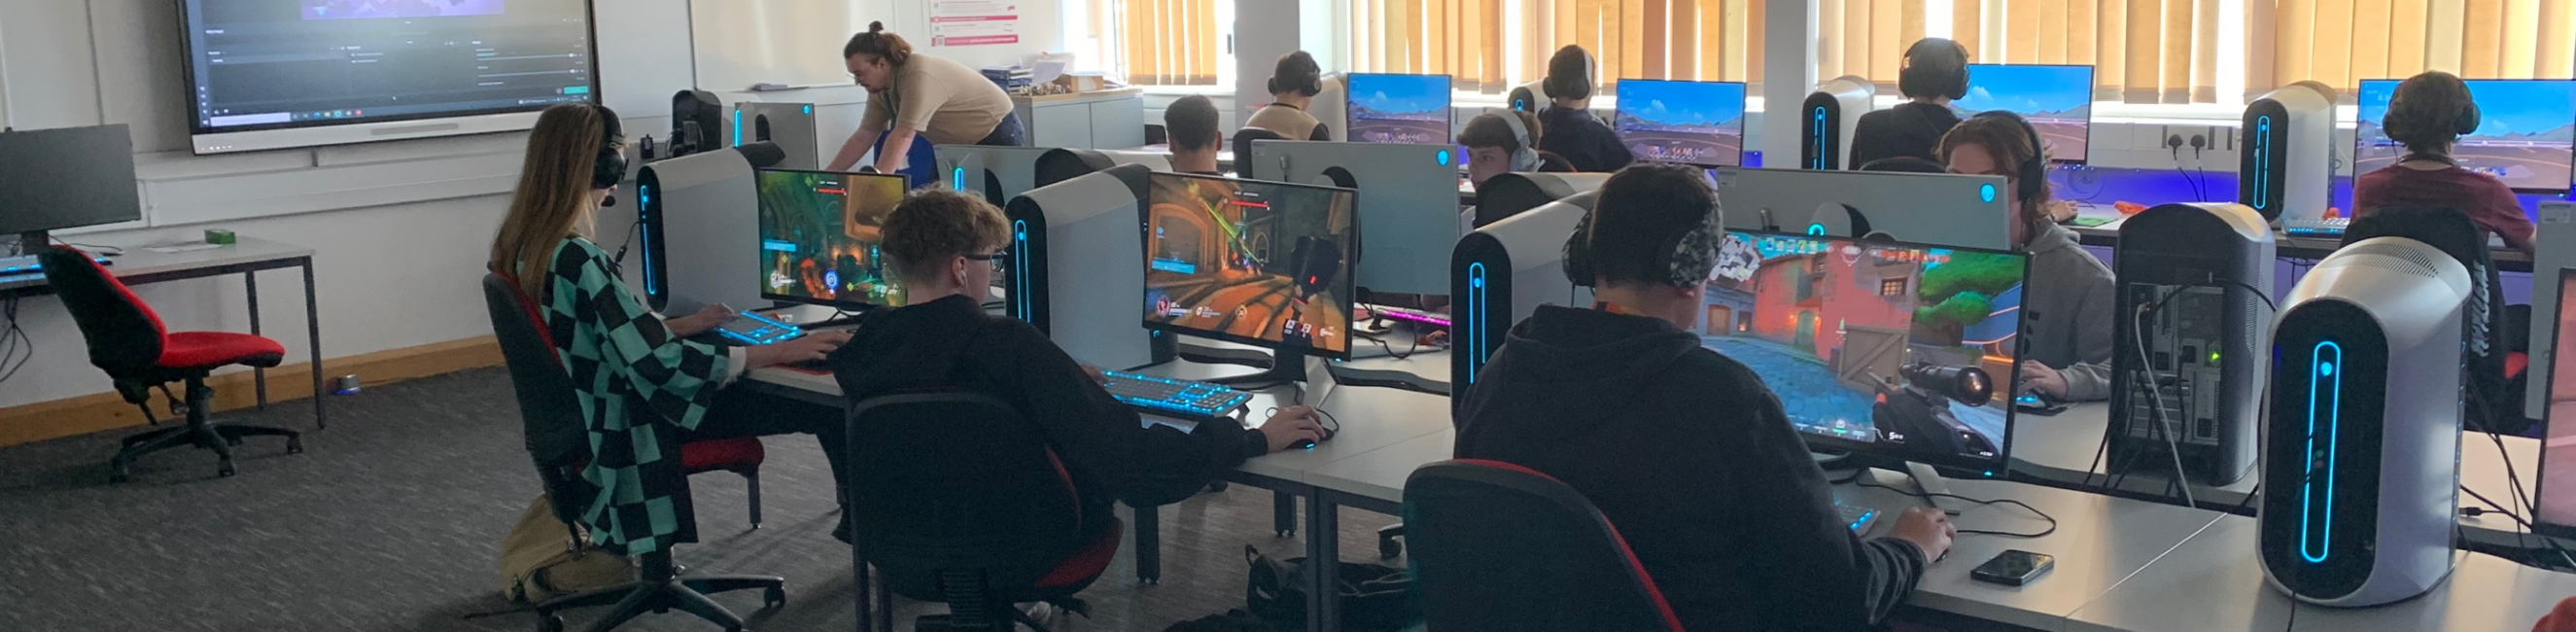 Group of Esports learners on their computers